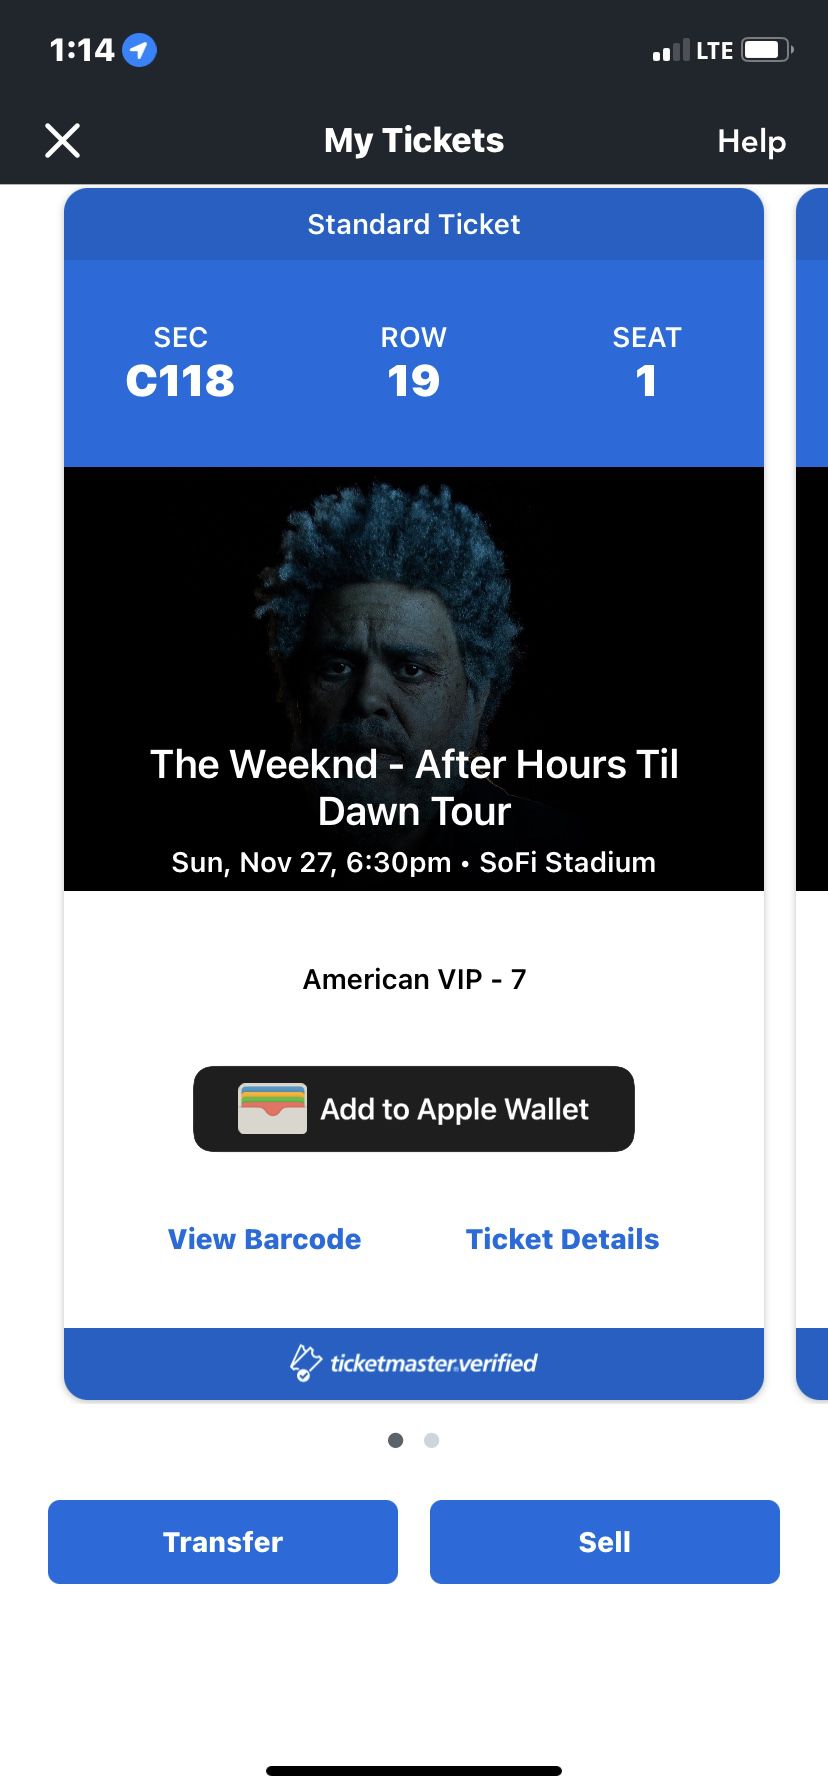 The Weekend tickets